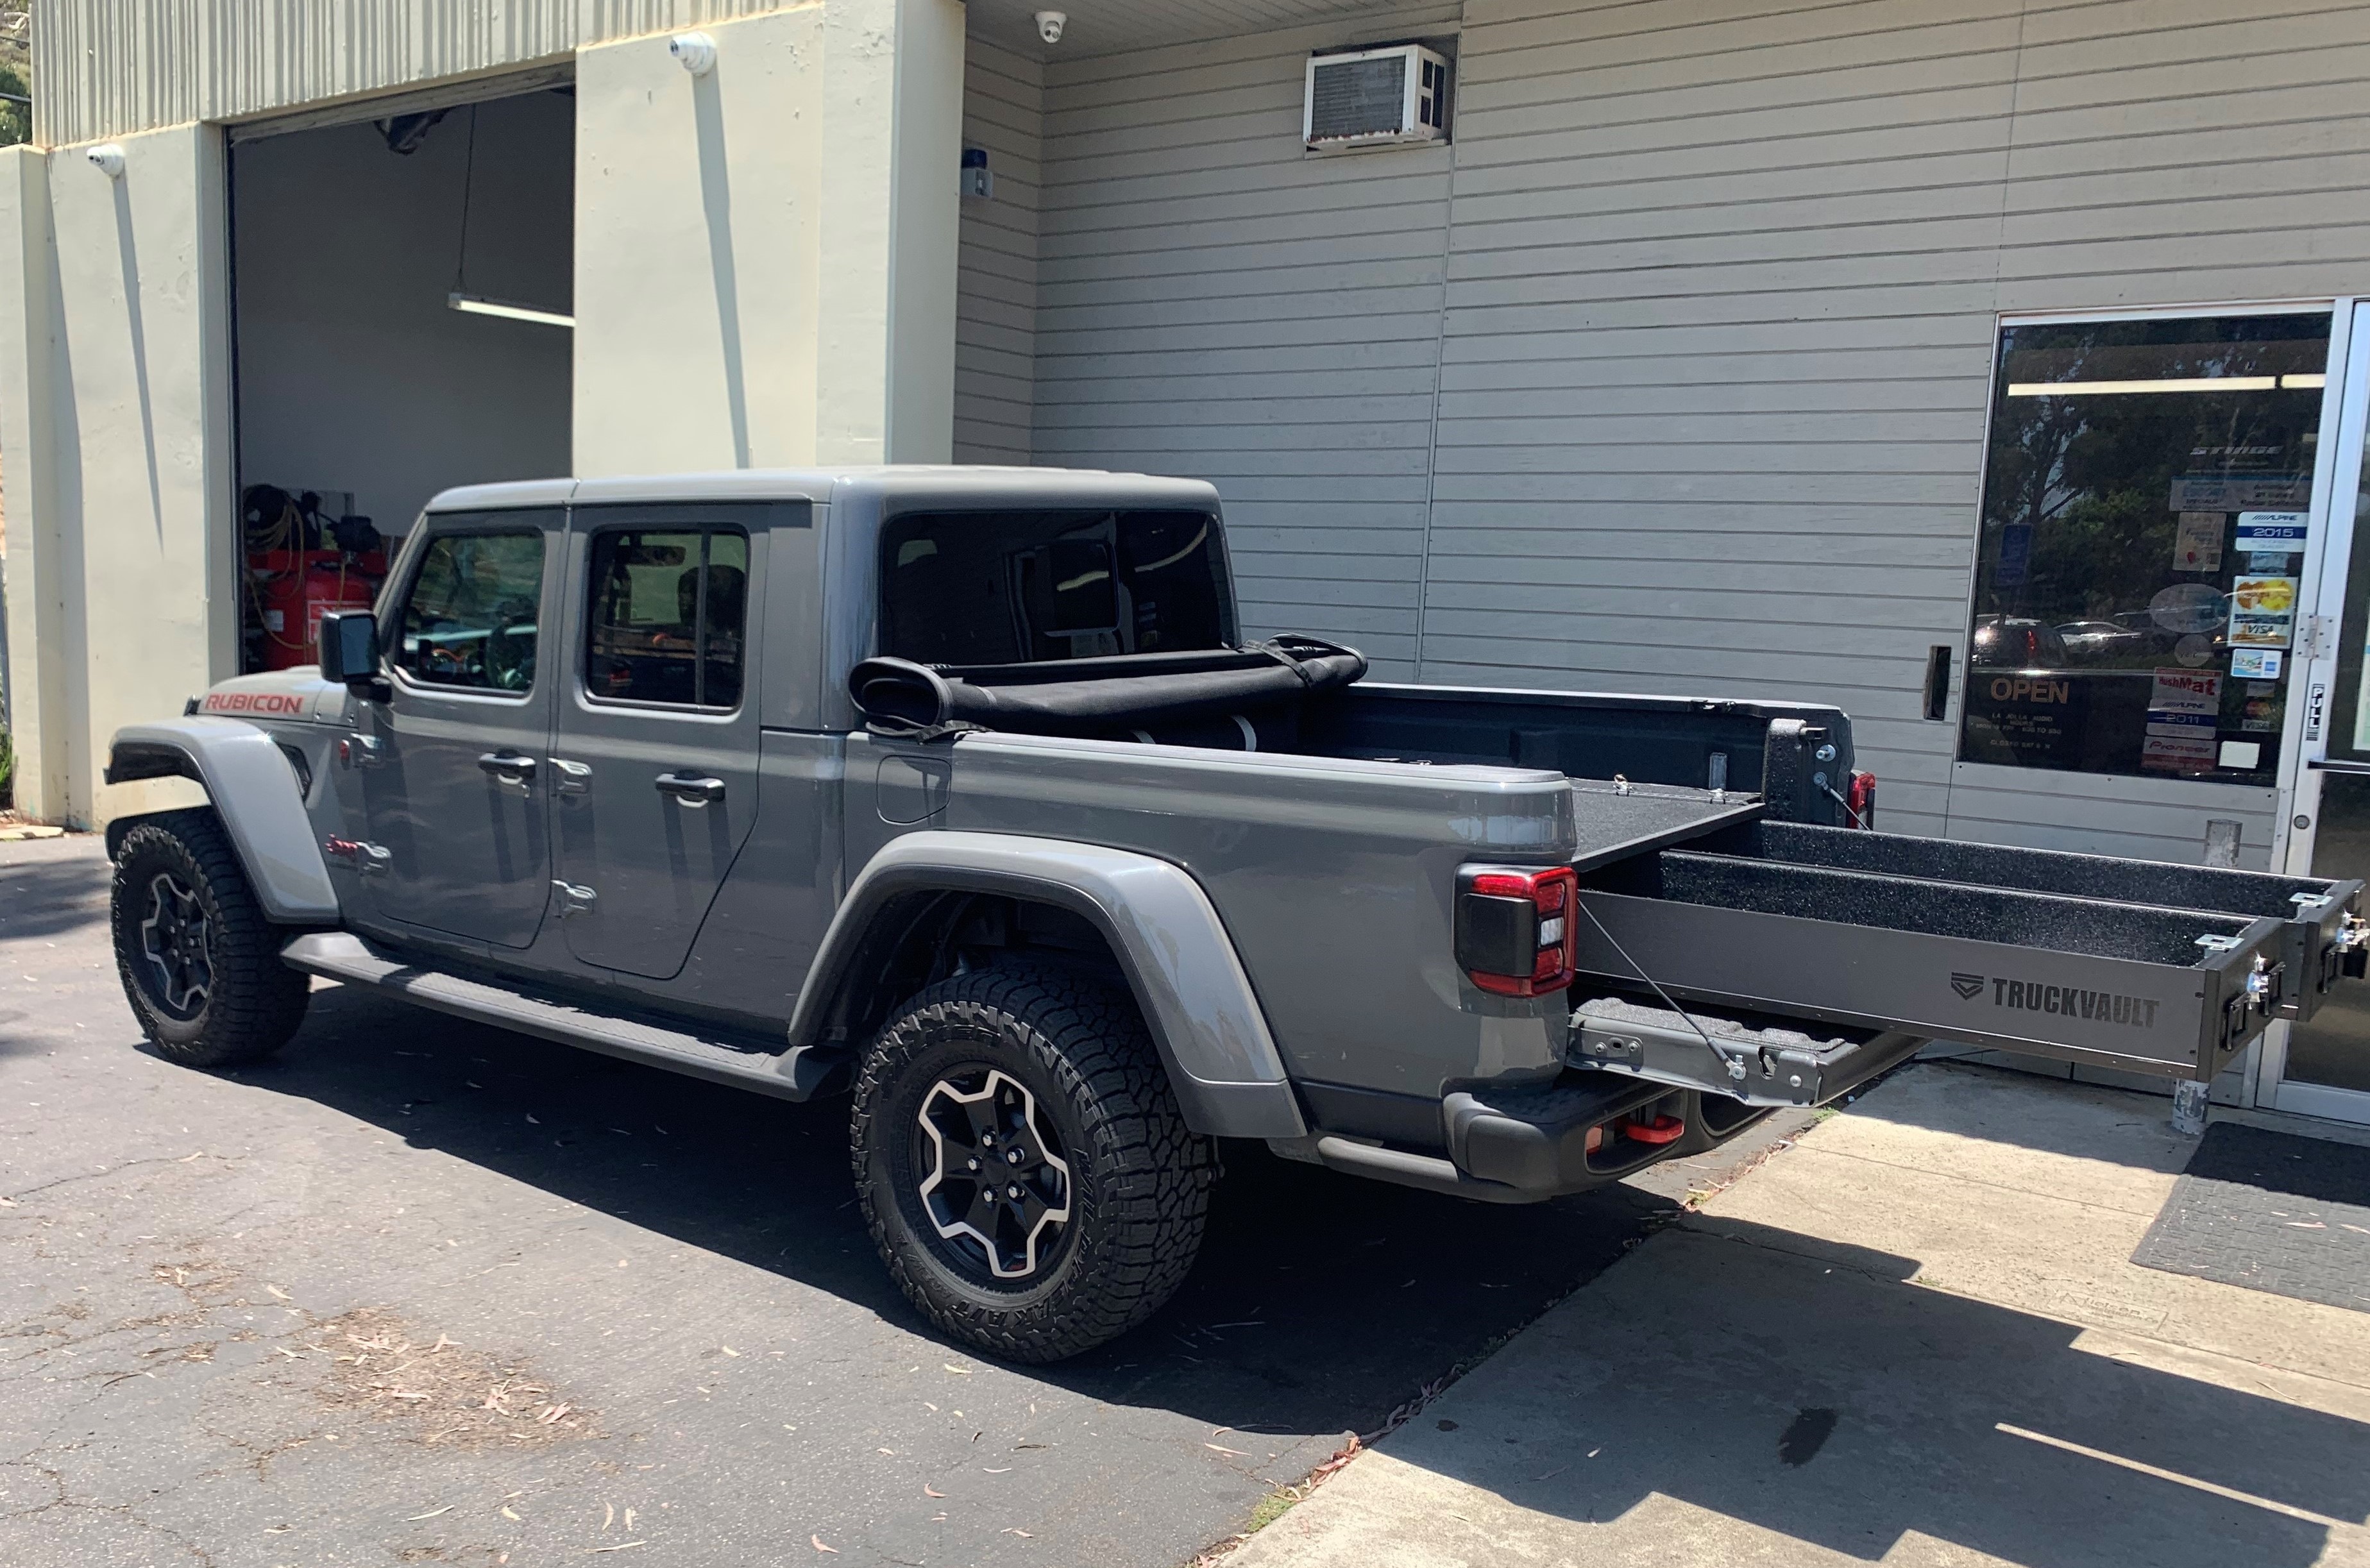 A silver Jeep Gladiator with an All-Weather TruckVault secure storage systemparked on a street.